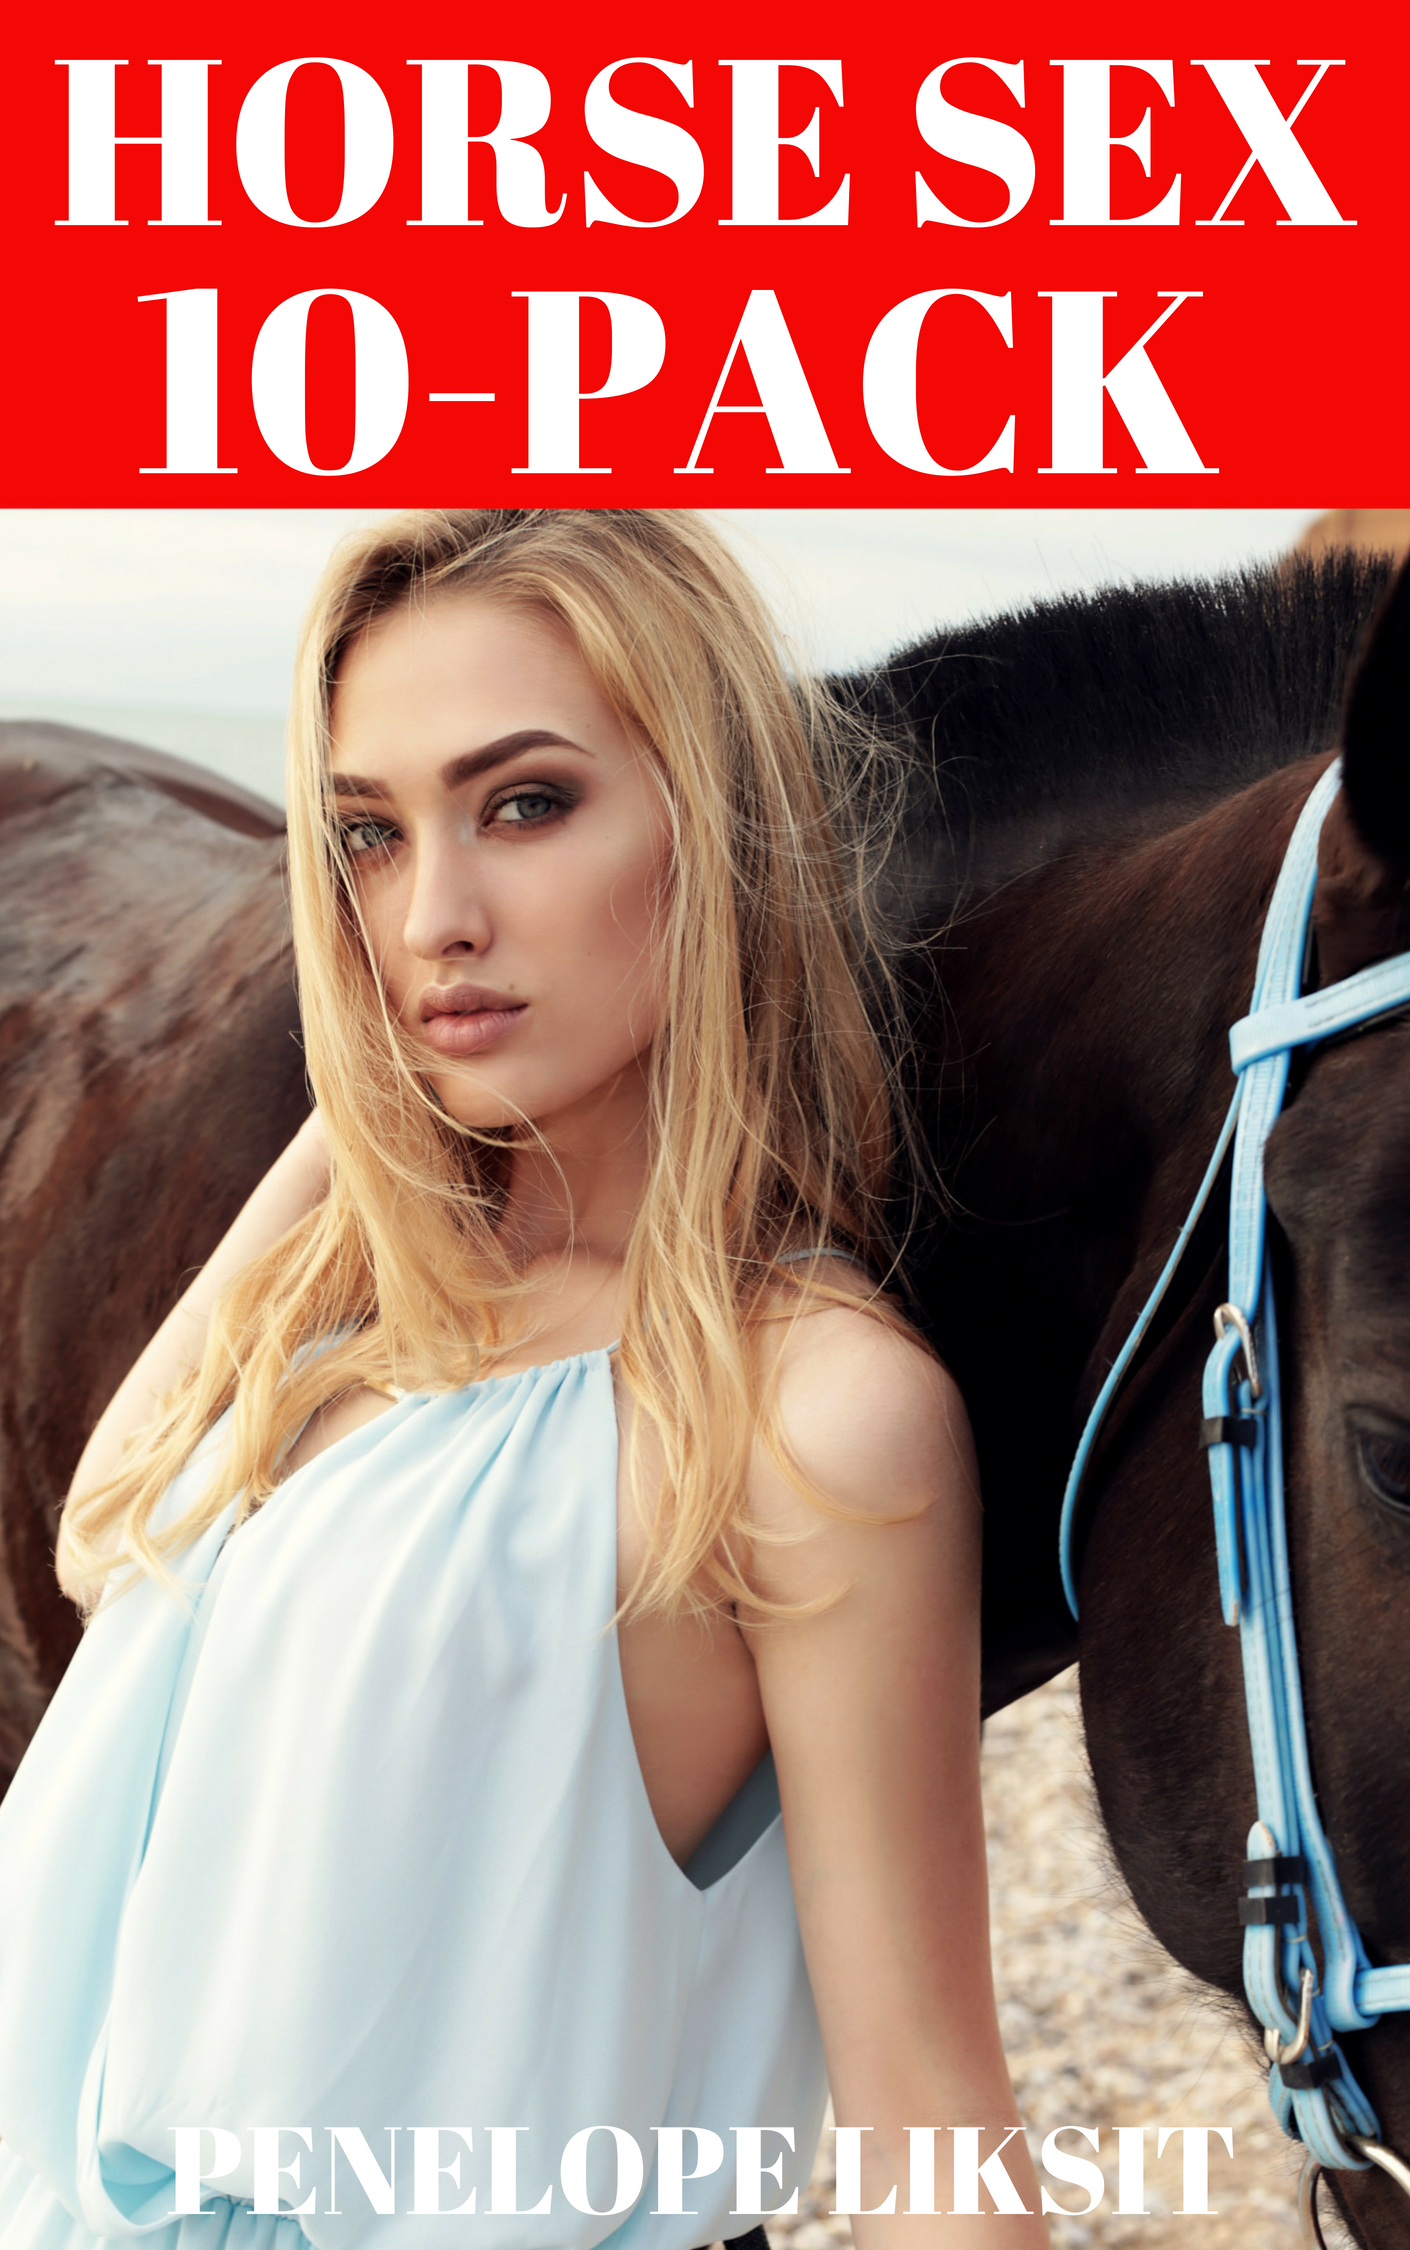 A Woman Can Have Sex With A Horse - Horse cock sex. Amateur Sex with Horse. 2019-07-27